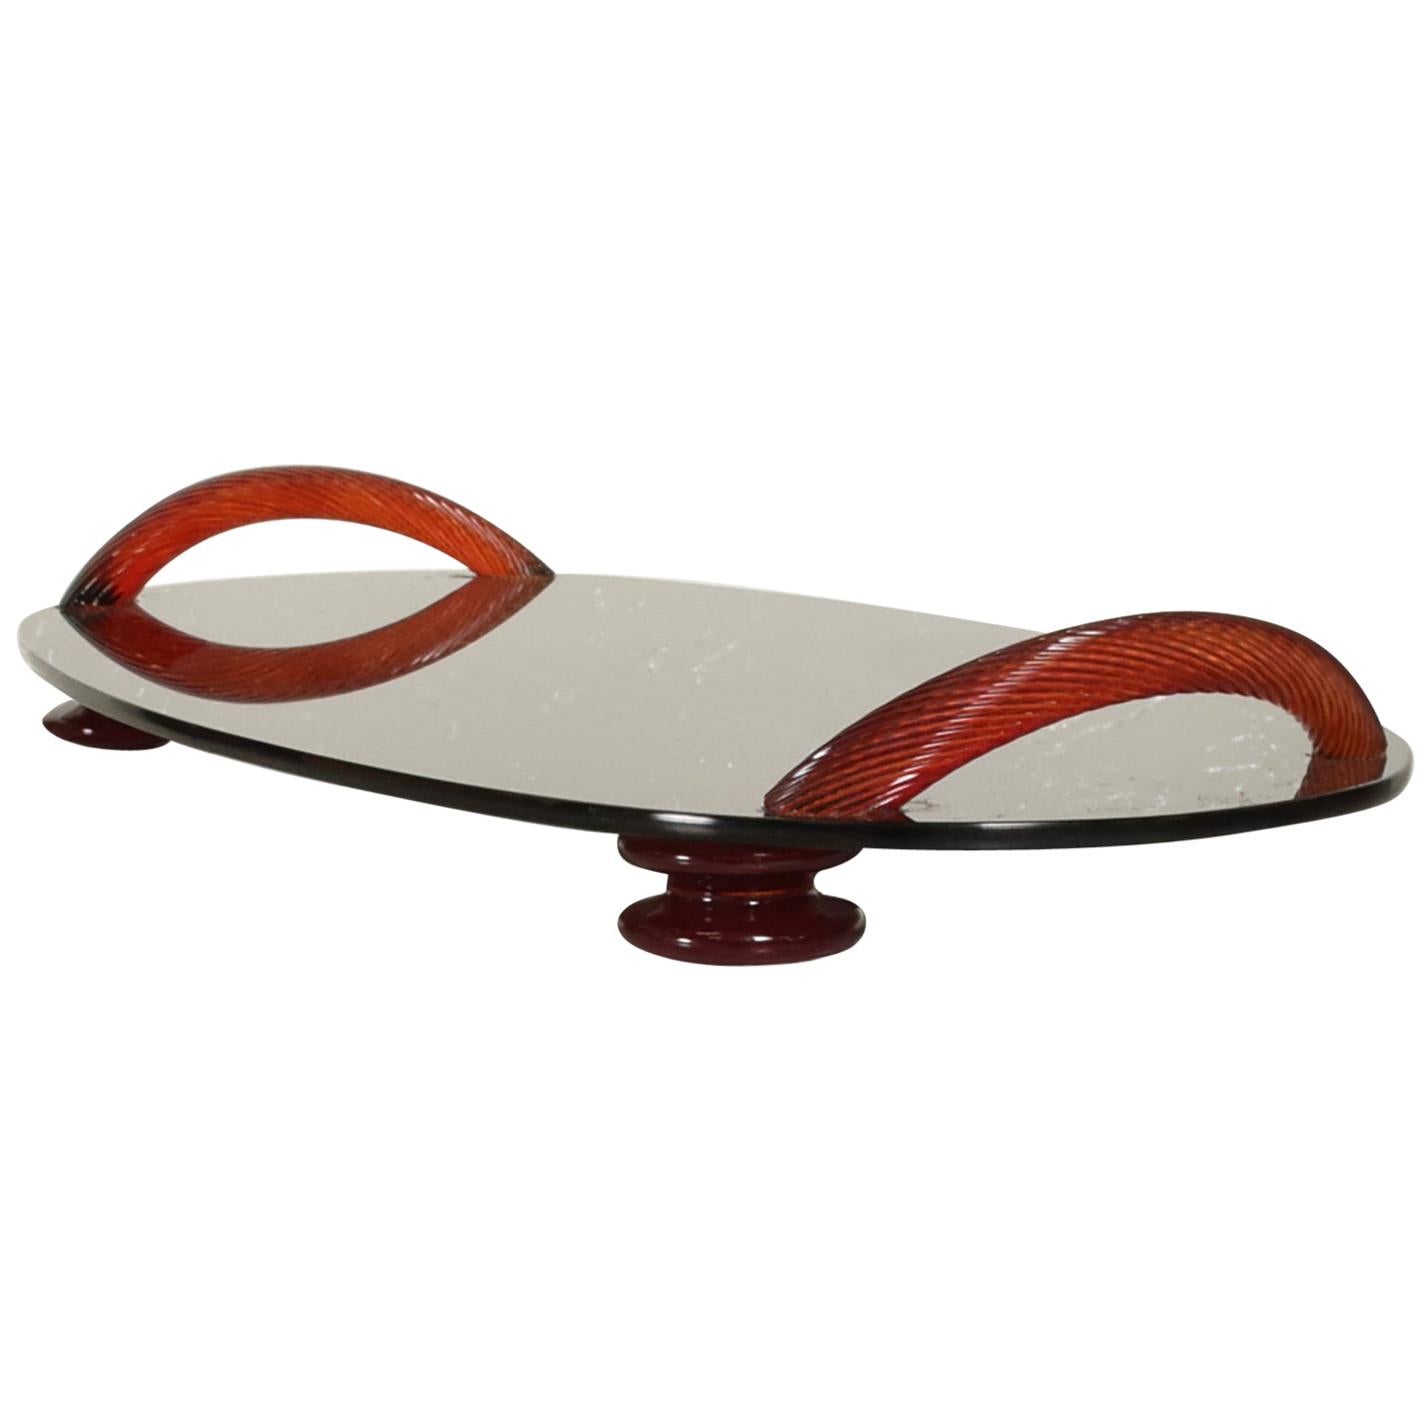 Modernist Oval Serving Tray in Smoke Glass with Red Ruby Glass Handles and Sabot